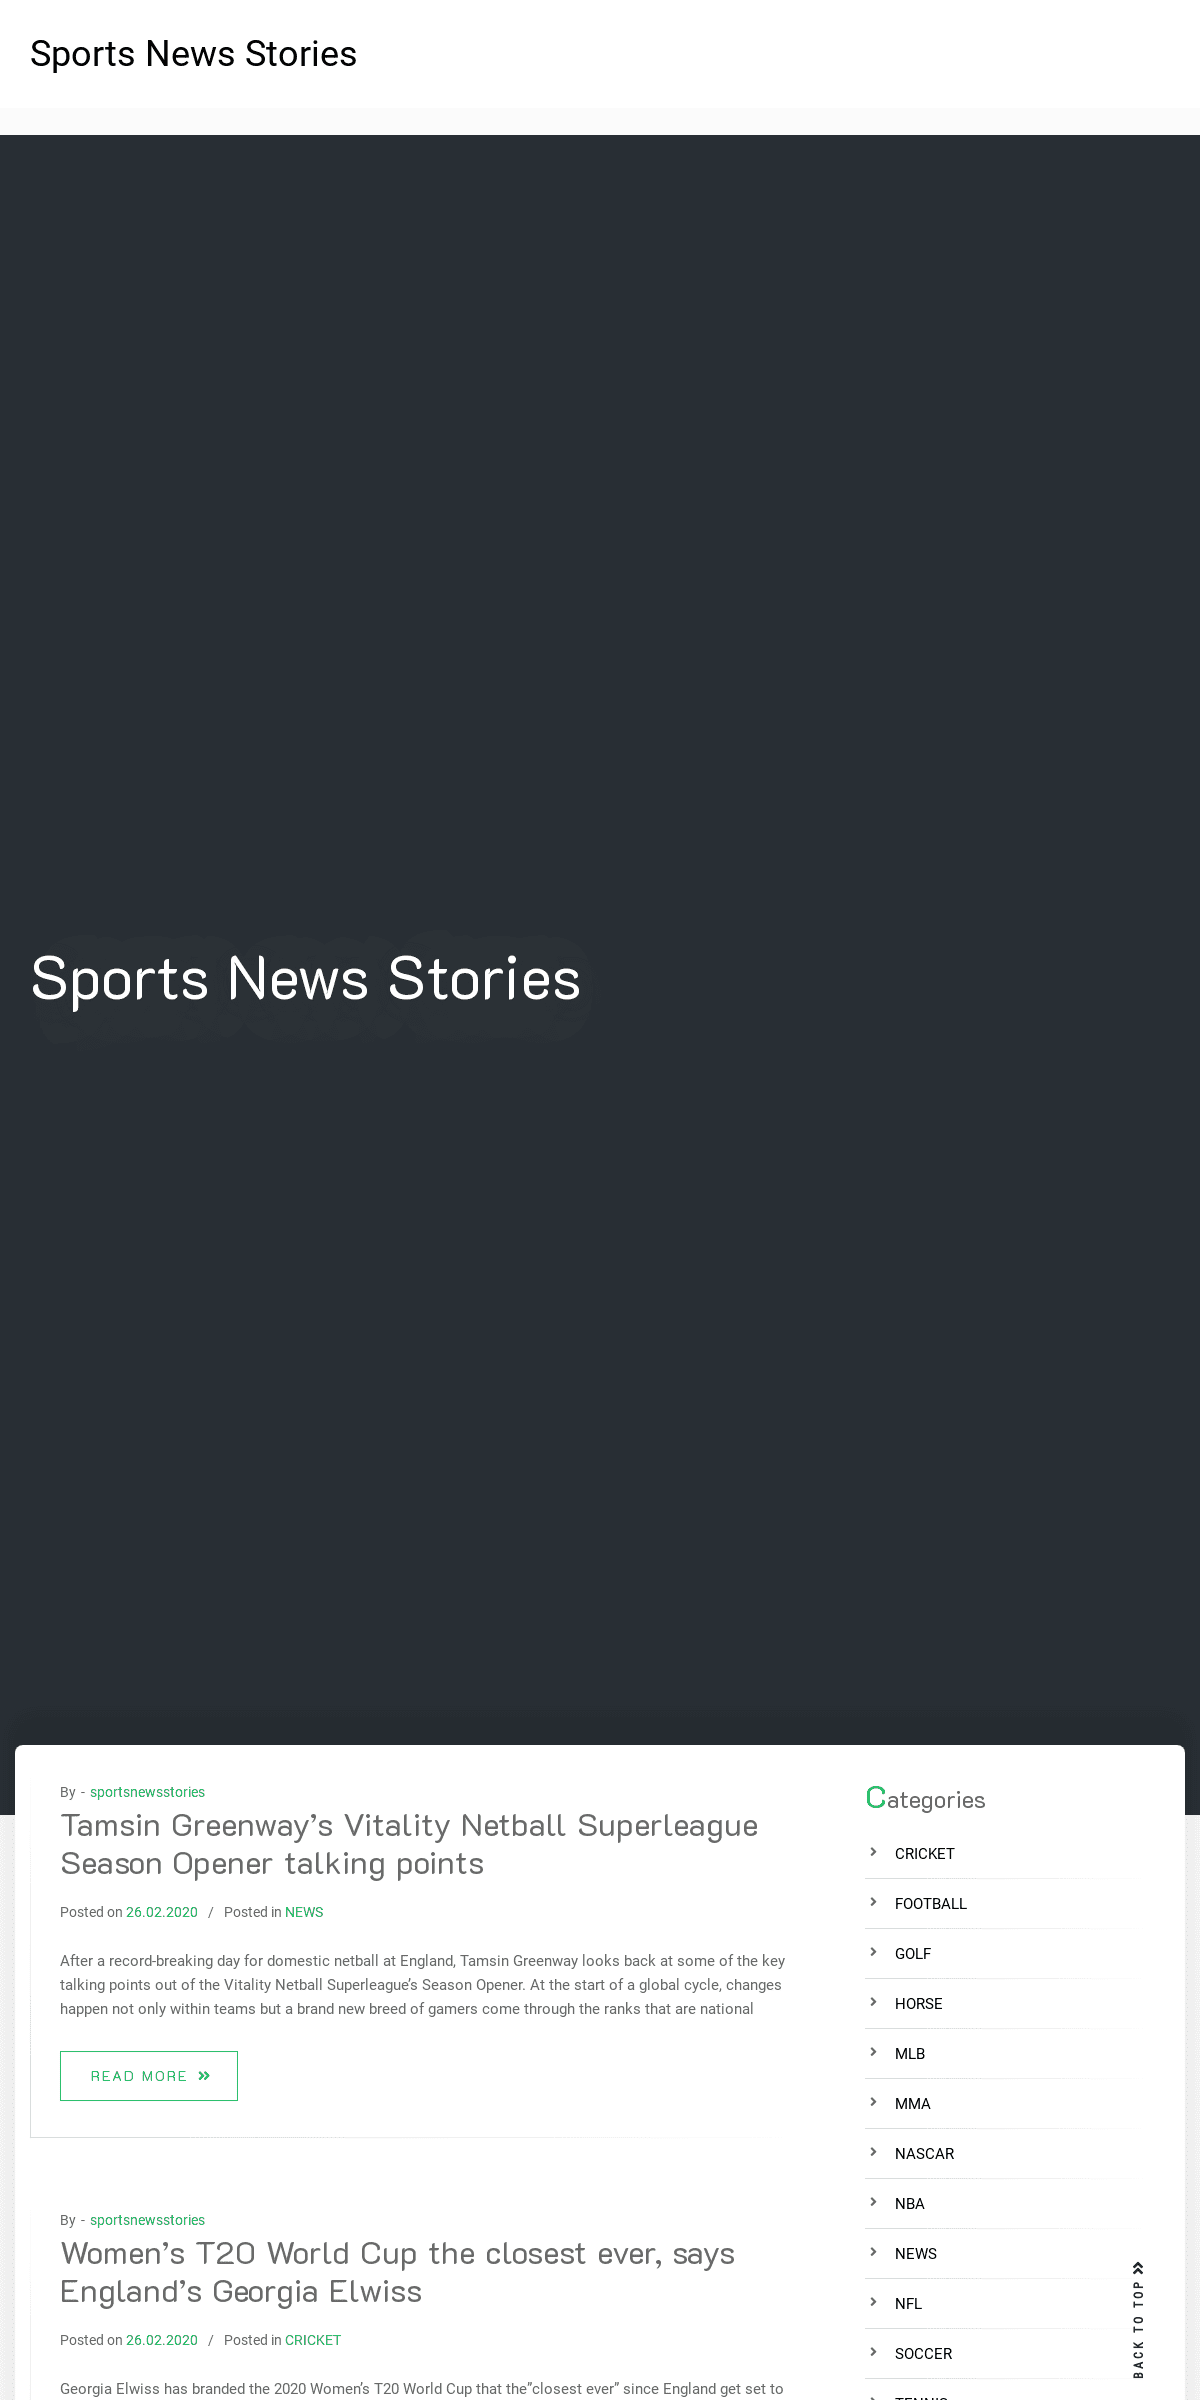 A complete backup of sportsnewsstories.com